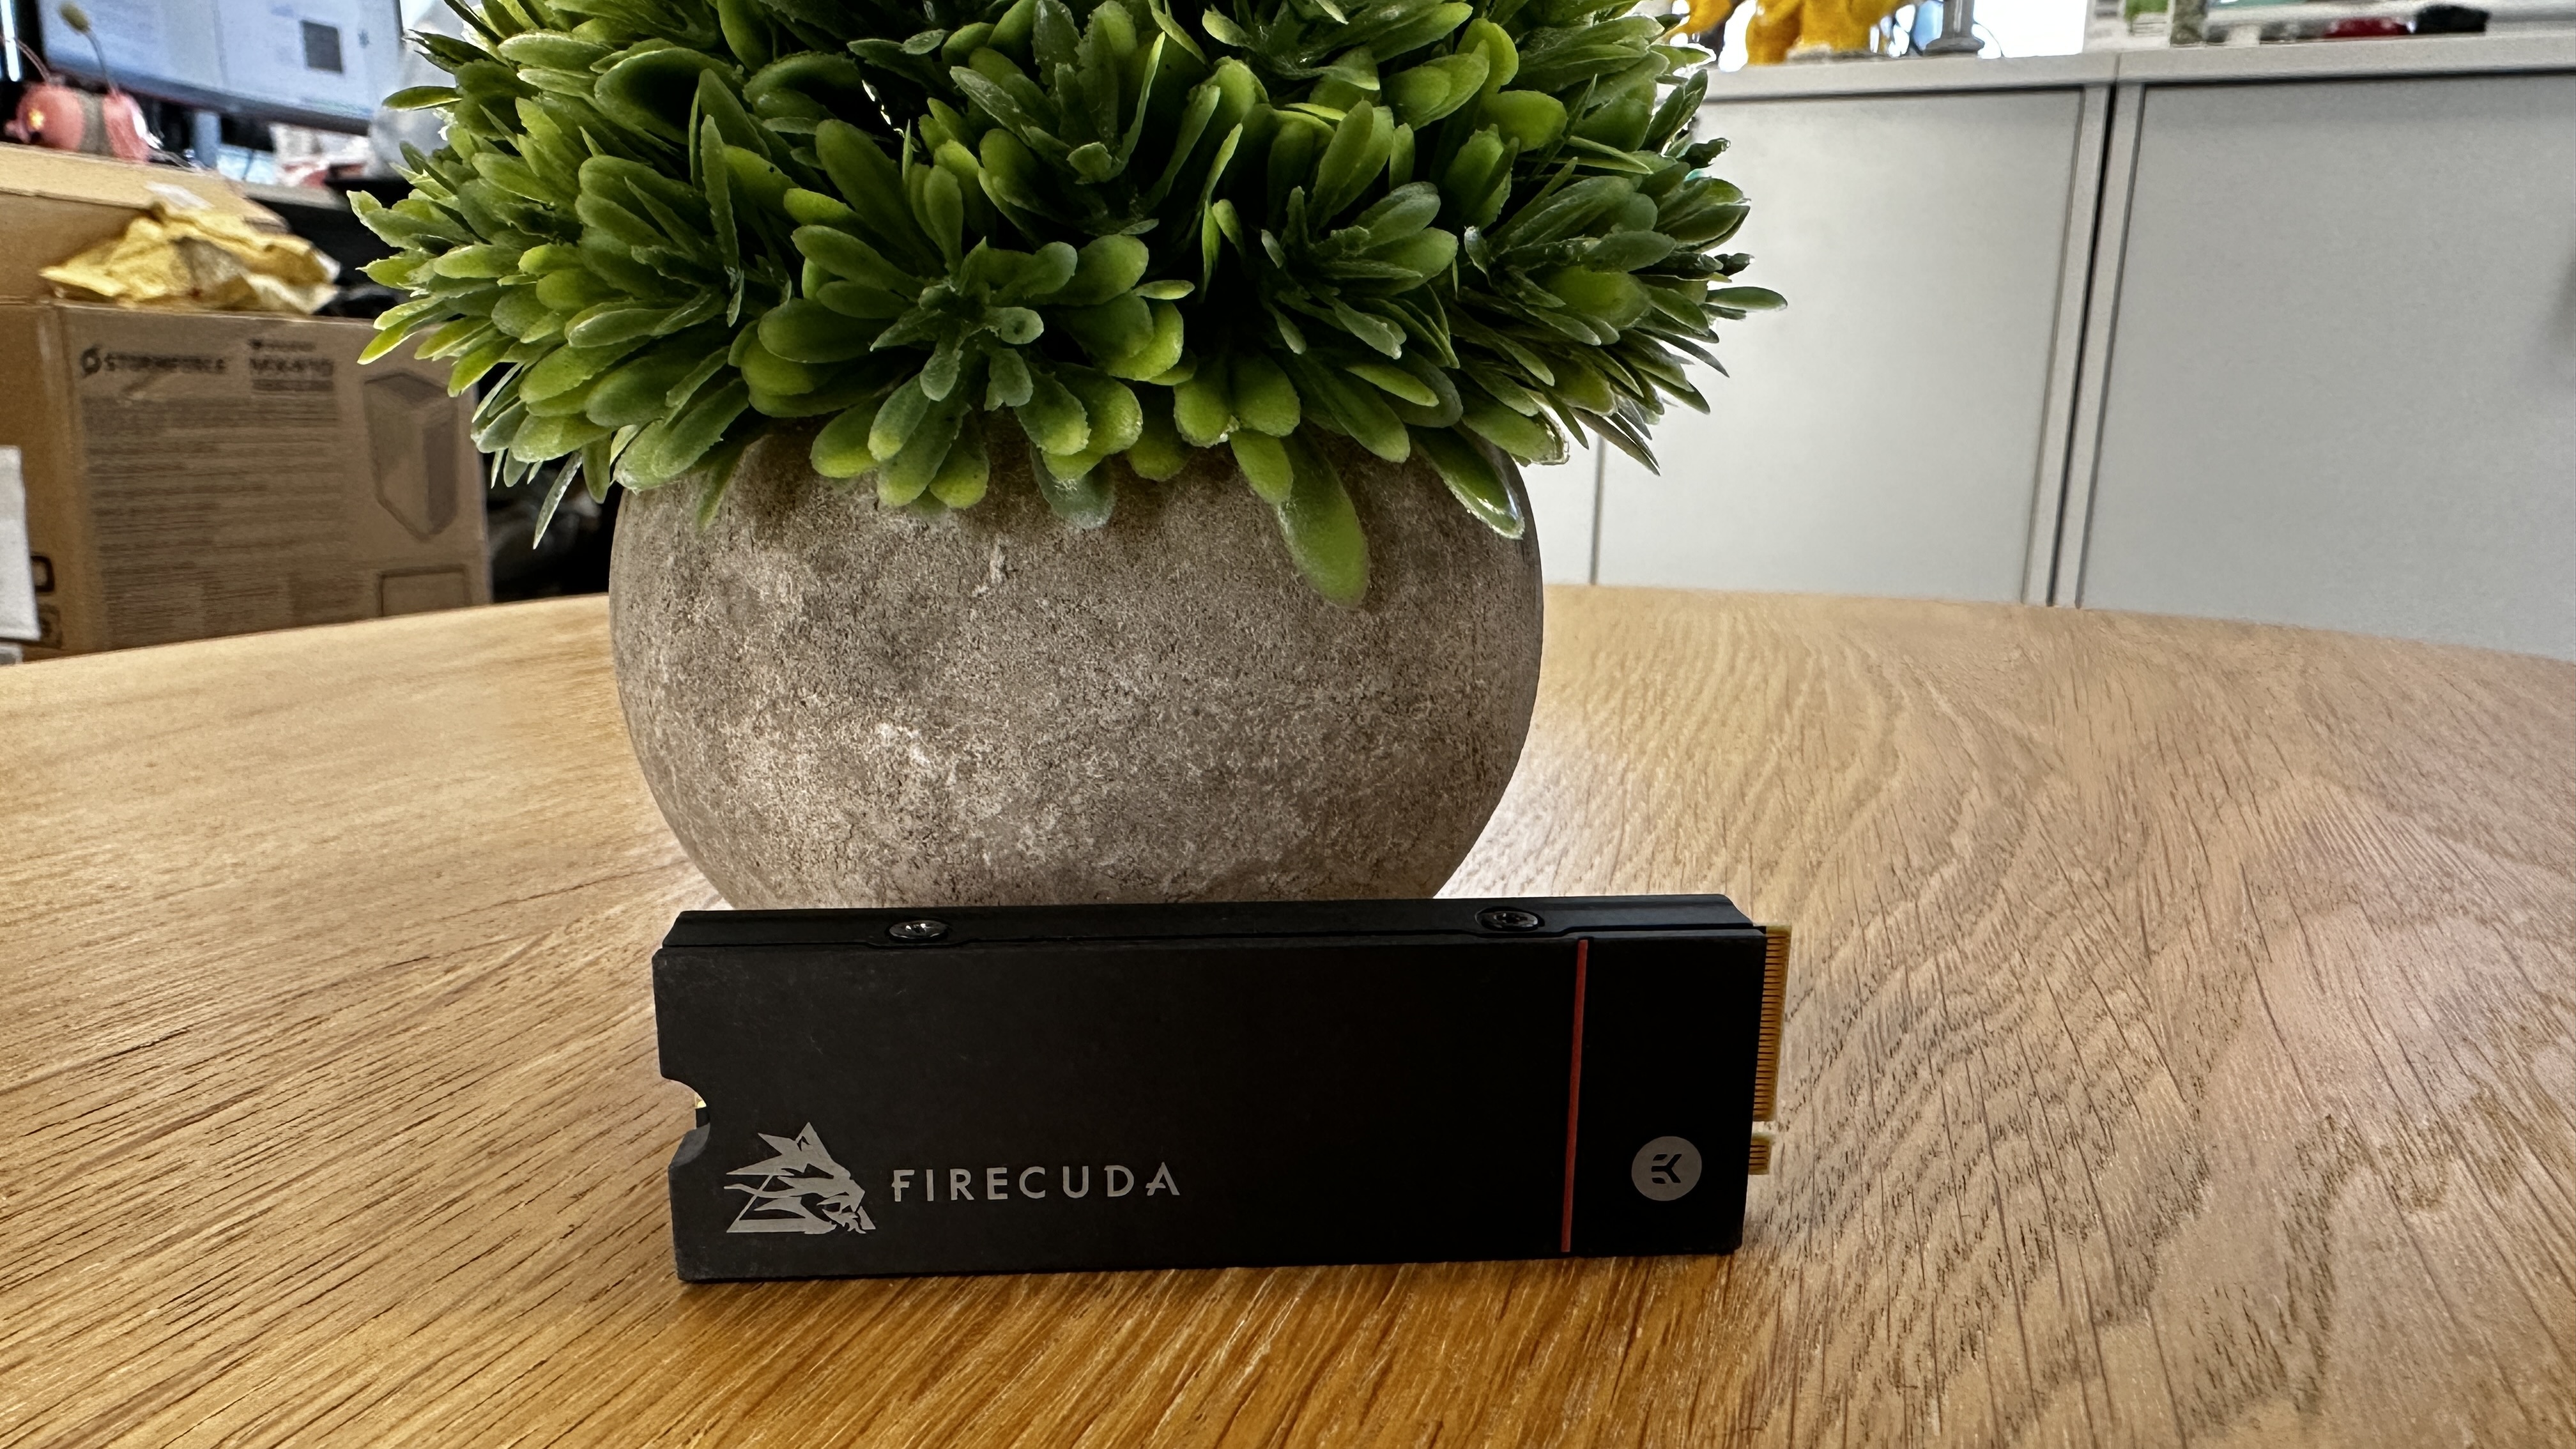 Seagate FireCuda 530 next to a potted plant